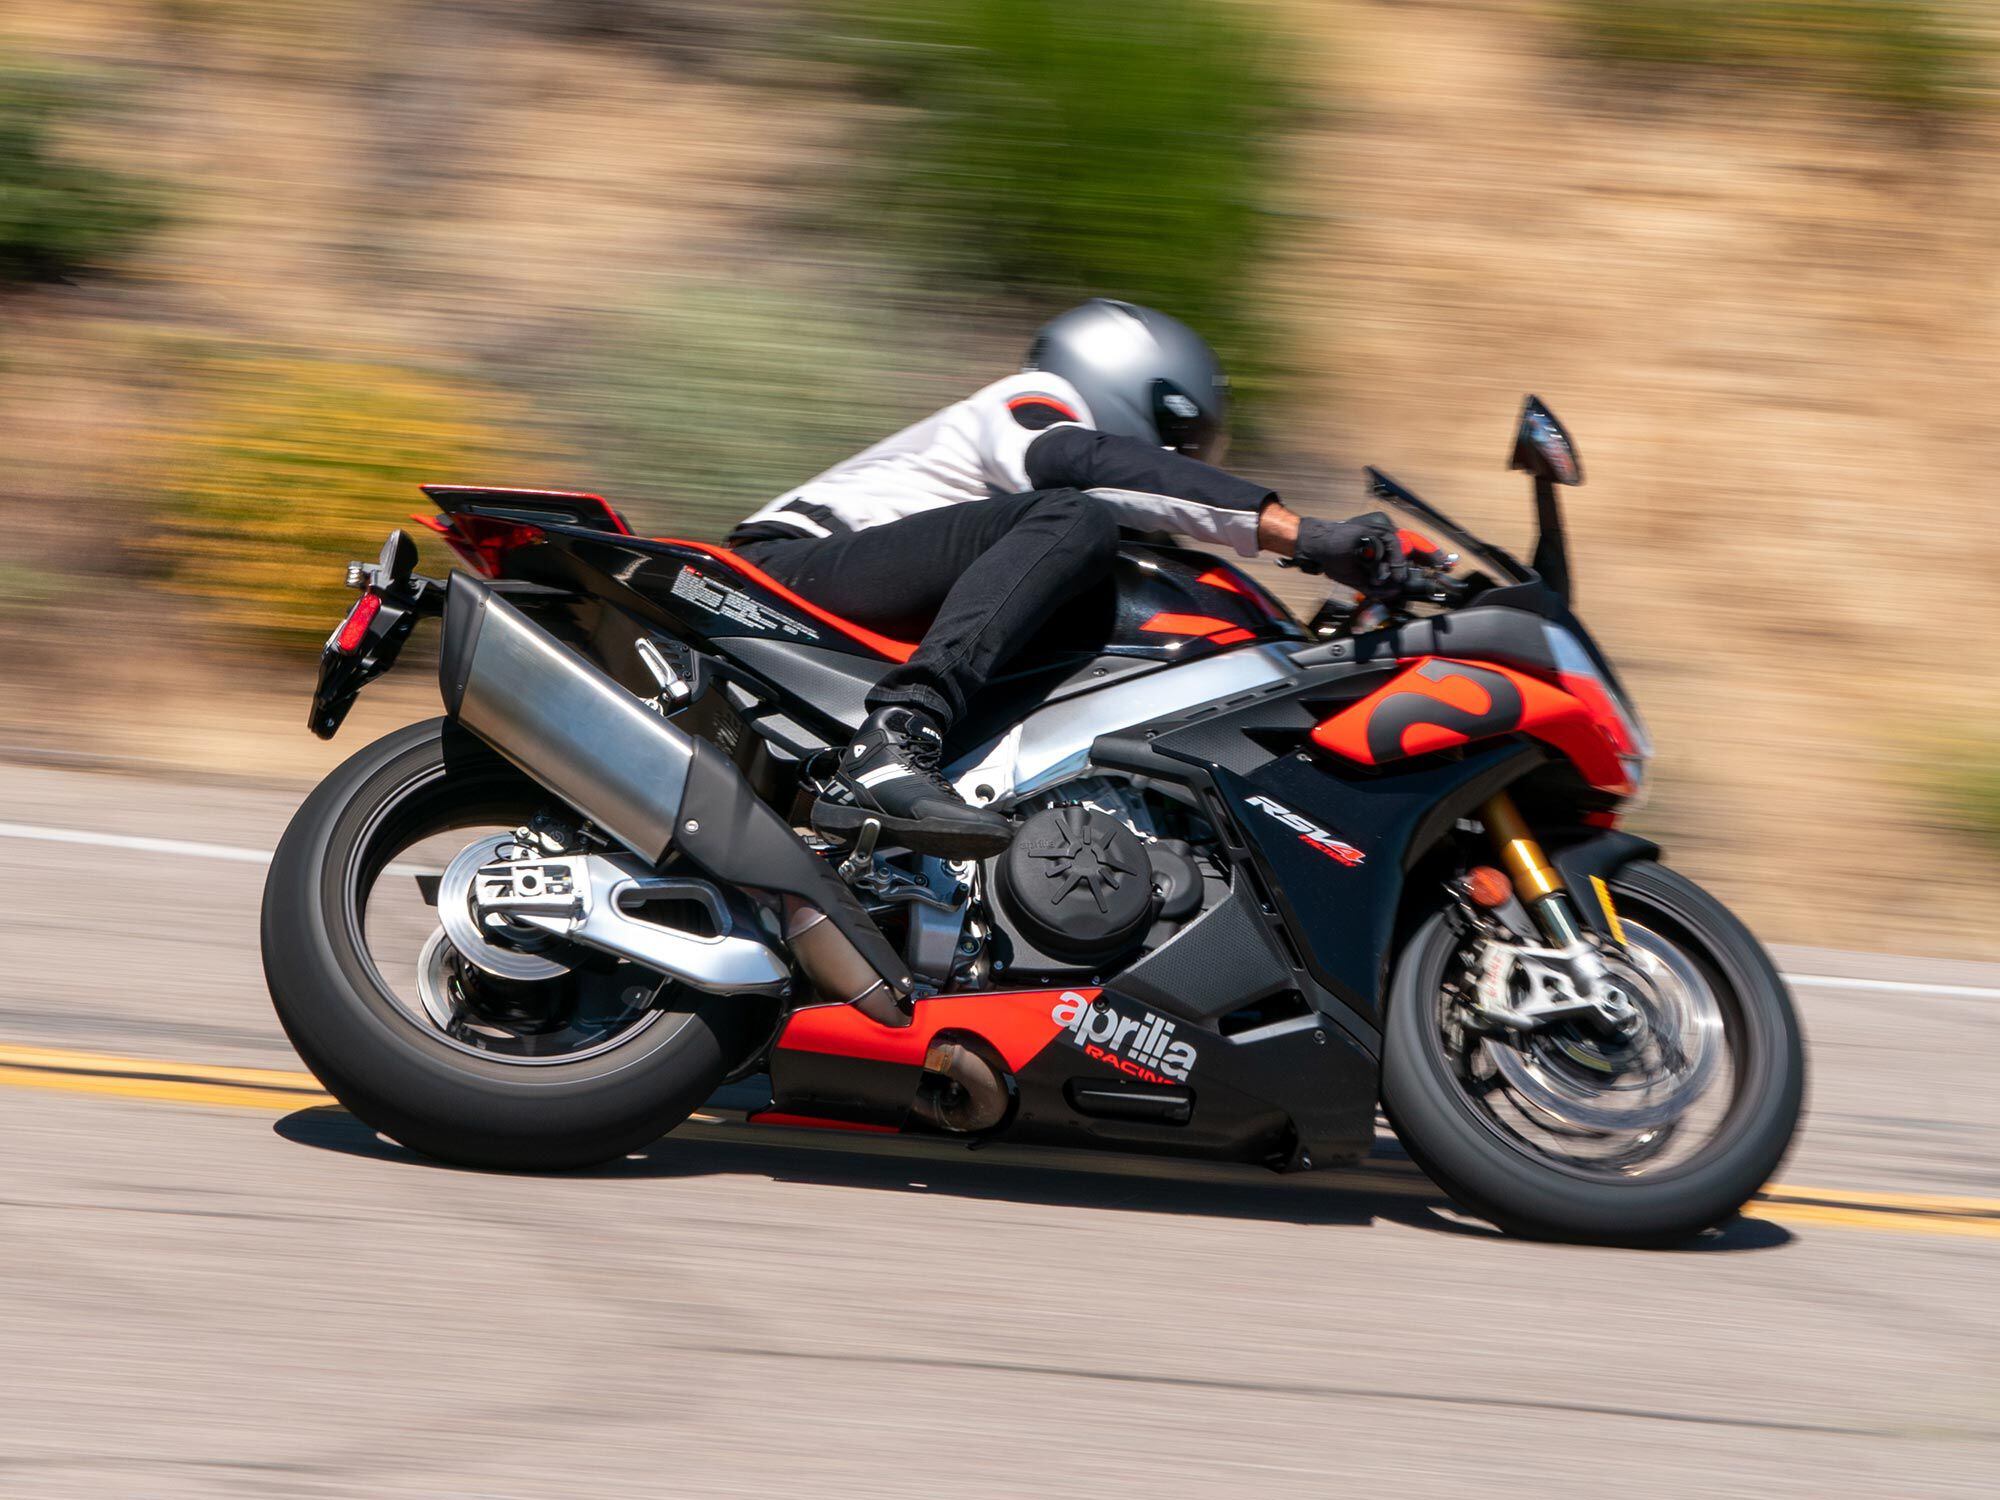 We continue to be impressed with the RSV4’s above average agility despite its 439-pound curb weight.